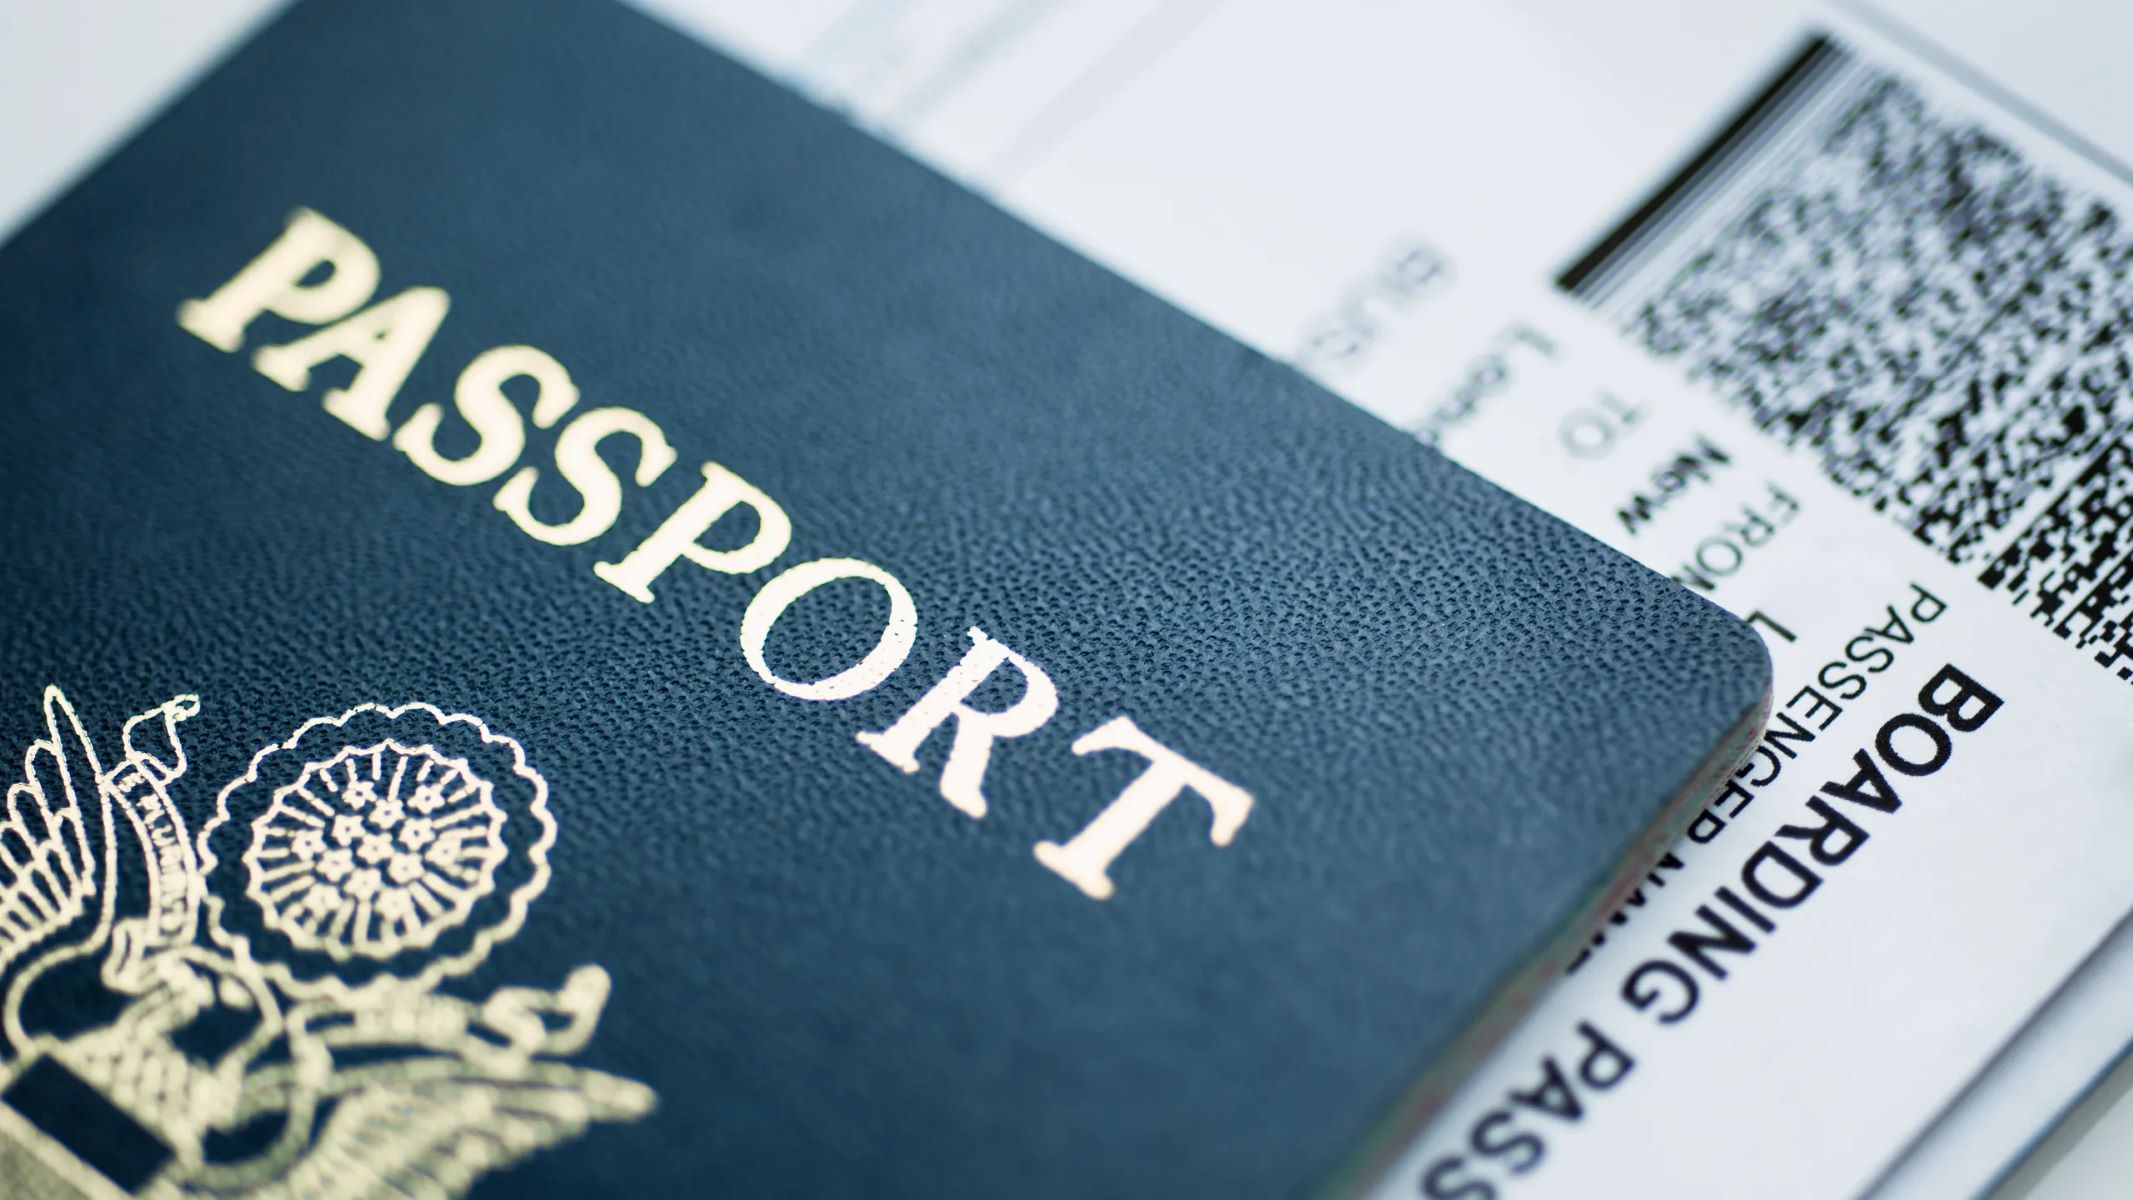 You Won’t Believe What Happens To Your Passport Book If You Lose Your Passport Card!